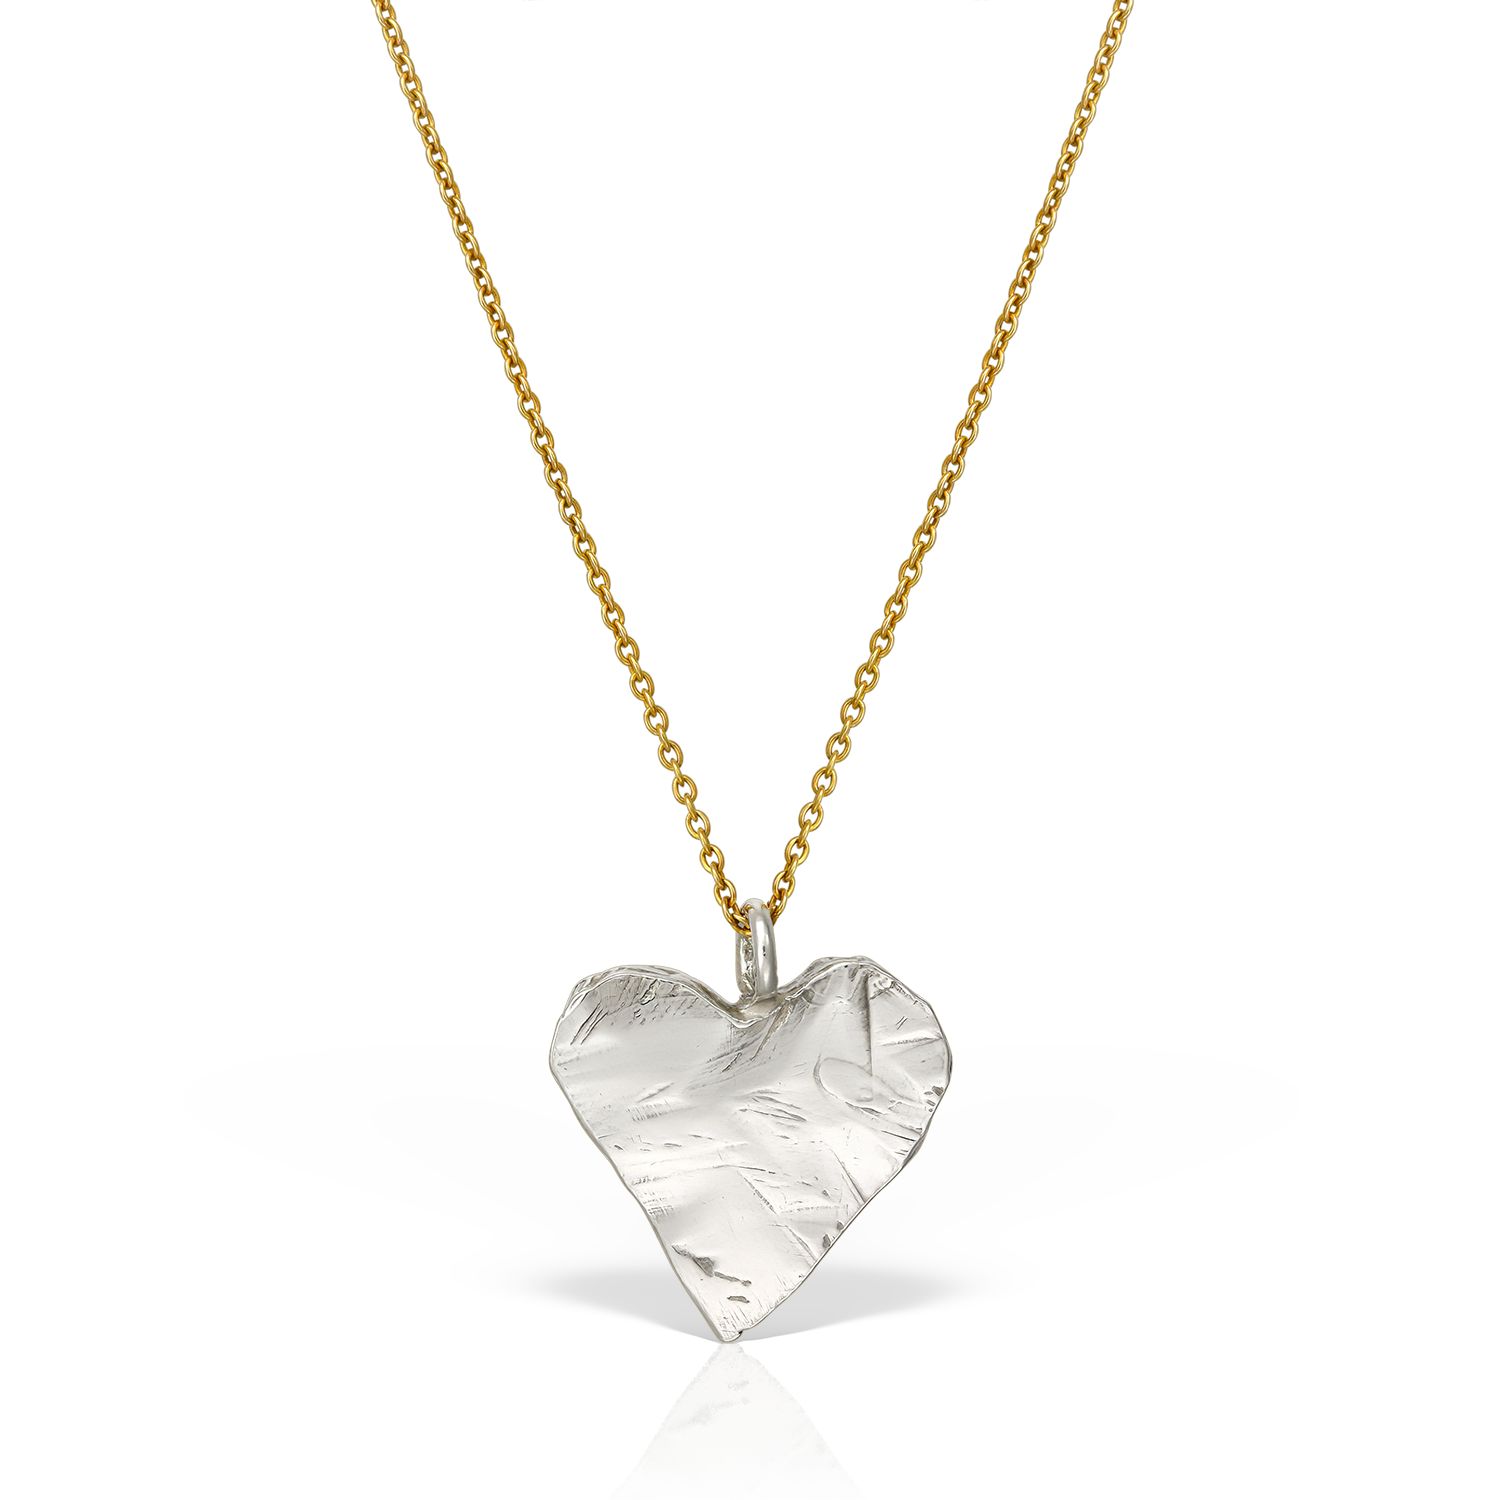 Women’s Silver / Gold Amour Silver Heart Pendant Necklace Madeleine